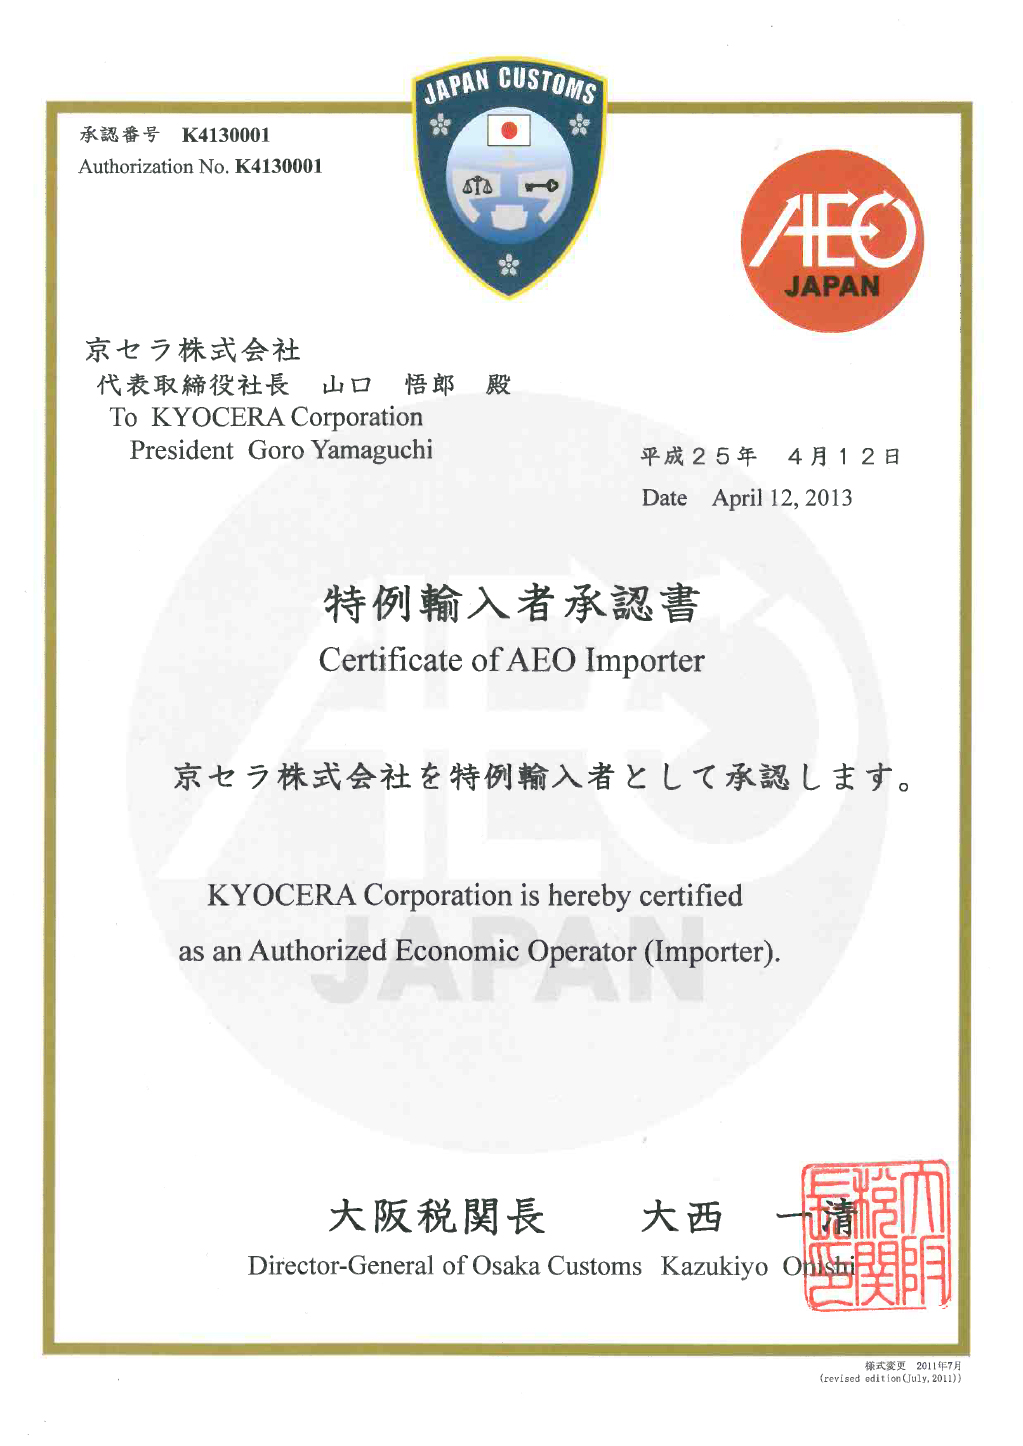 Photo: Authorized importer certificate